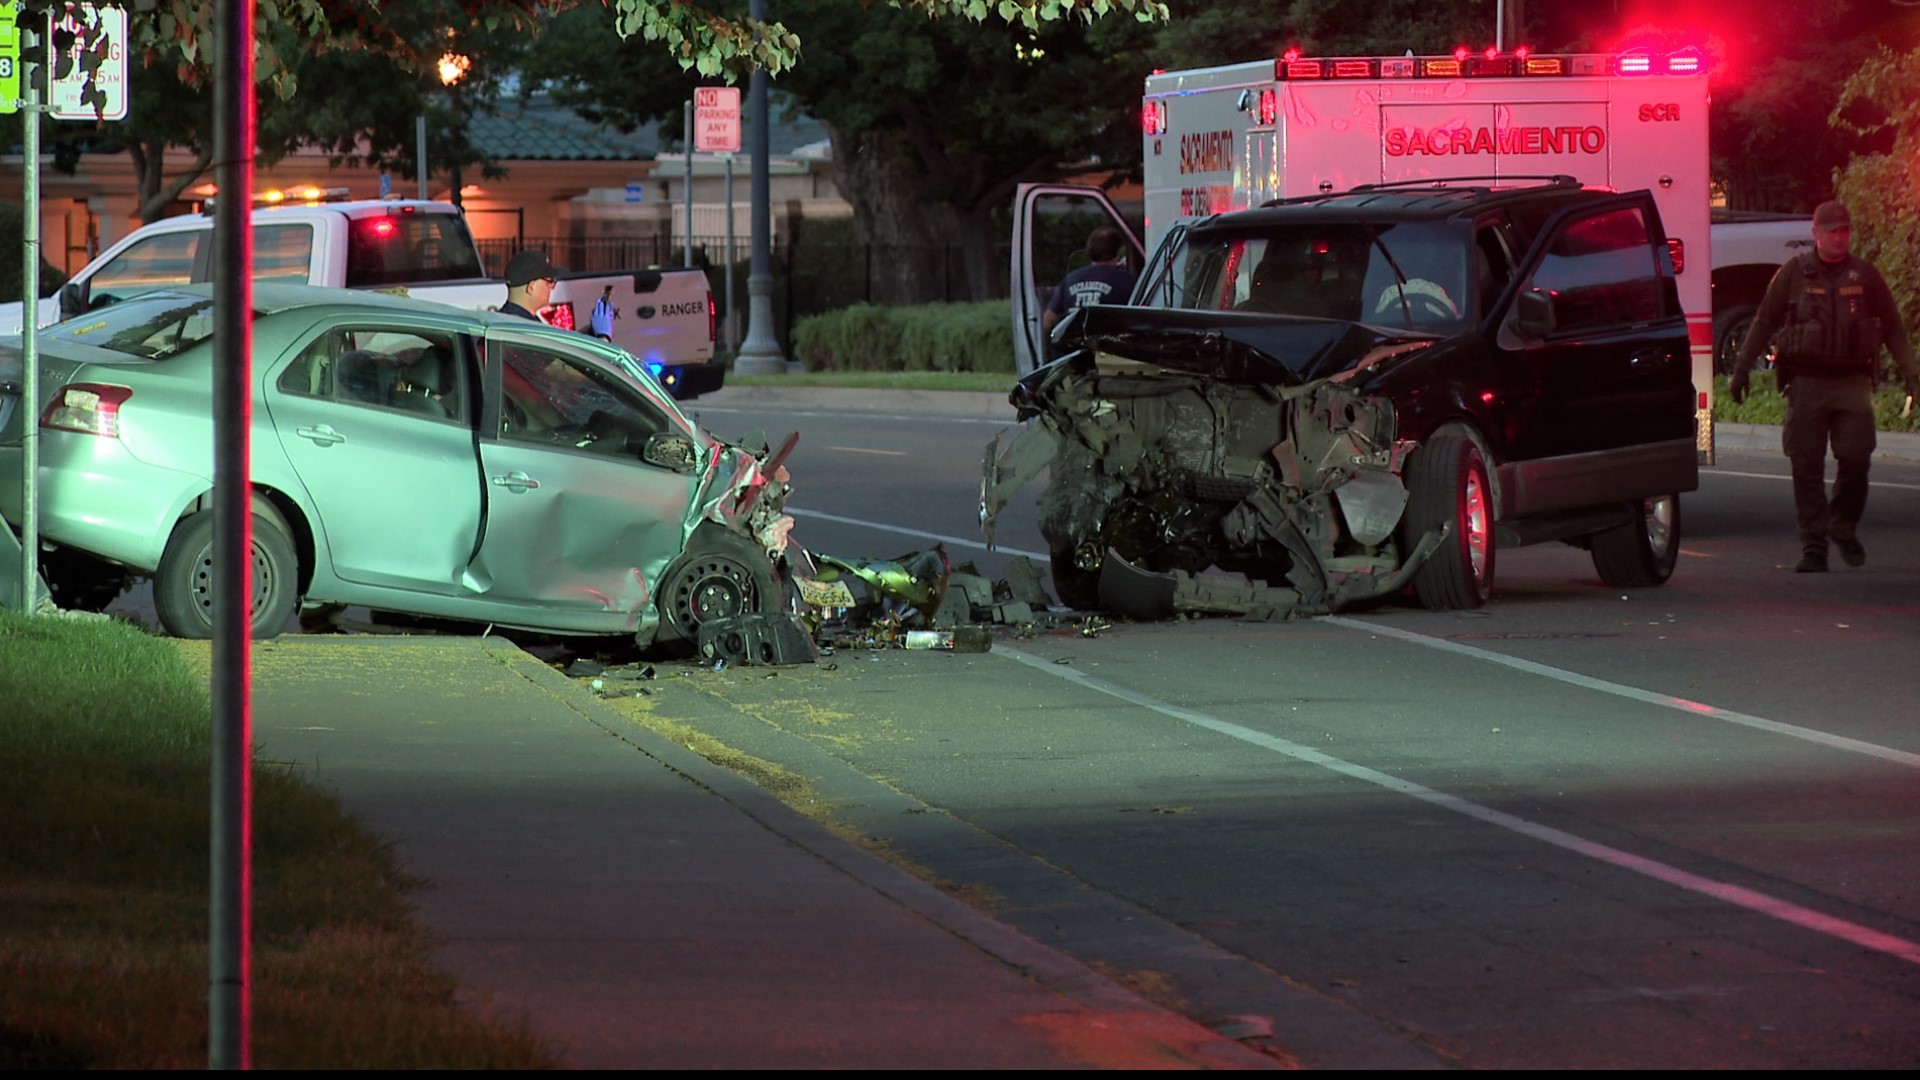 Two cars crashed head-on into each other on Front Street around 8 p.m.